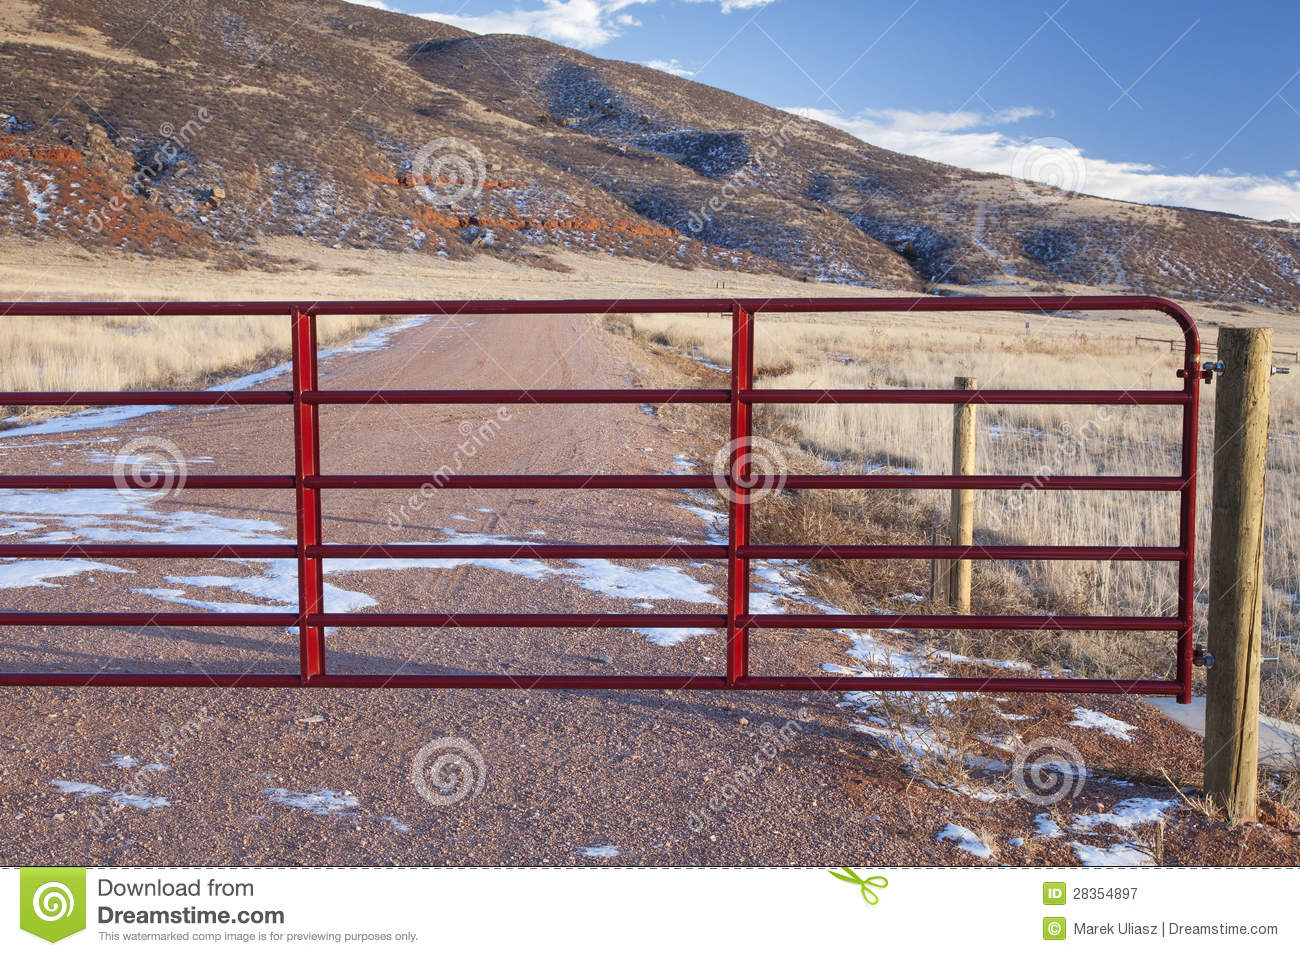 Closet Gate On A Ranch Road In A Mountain Valley   Red Mountain Open